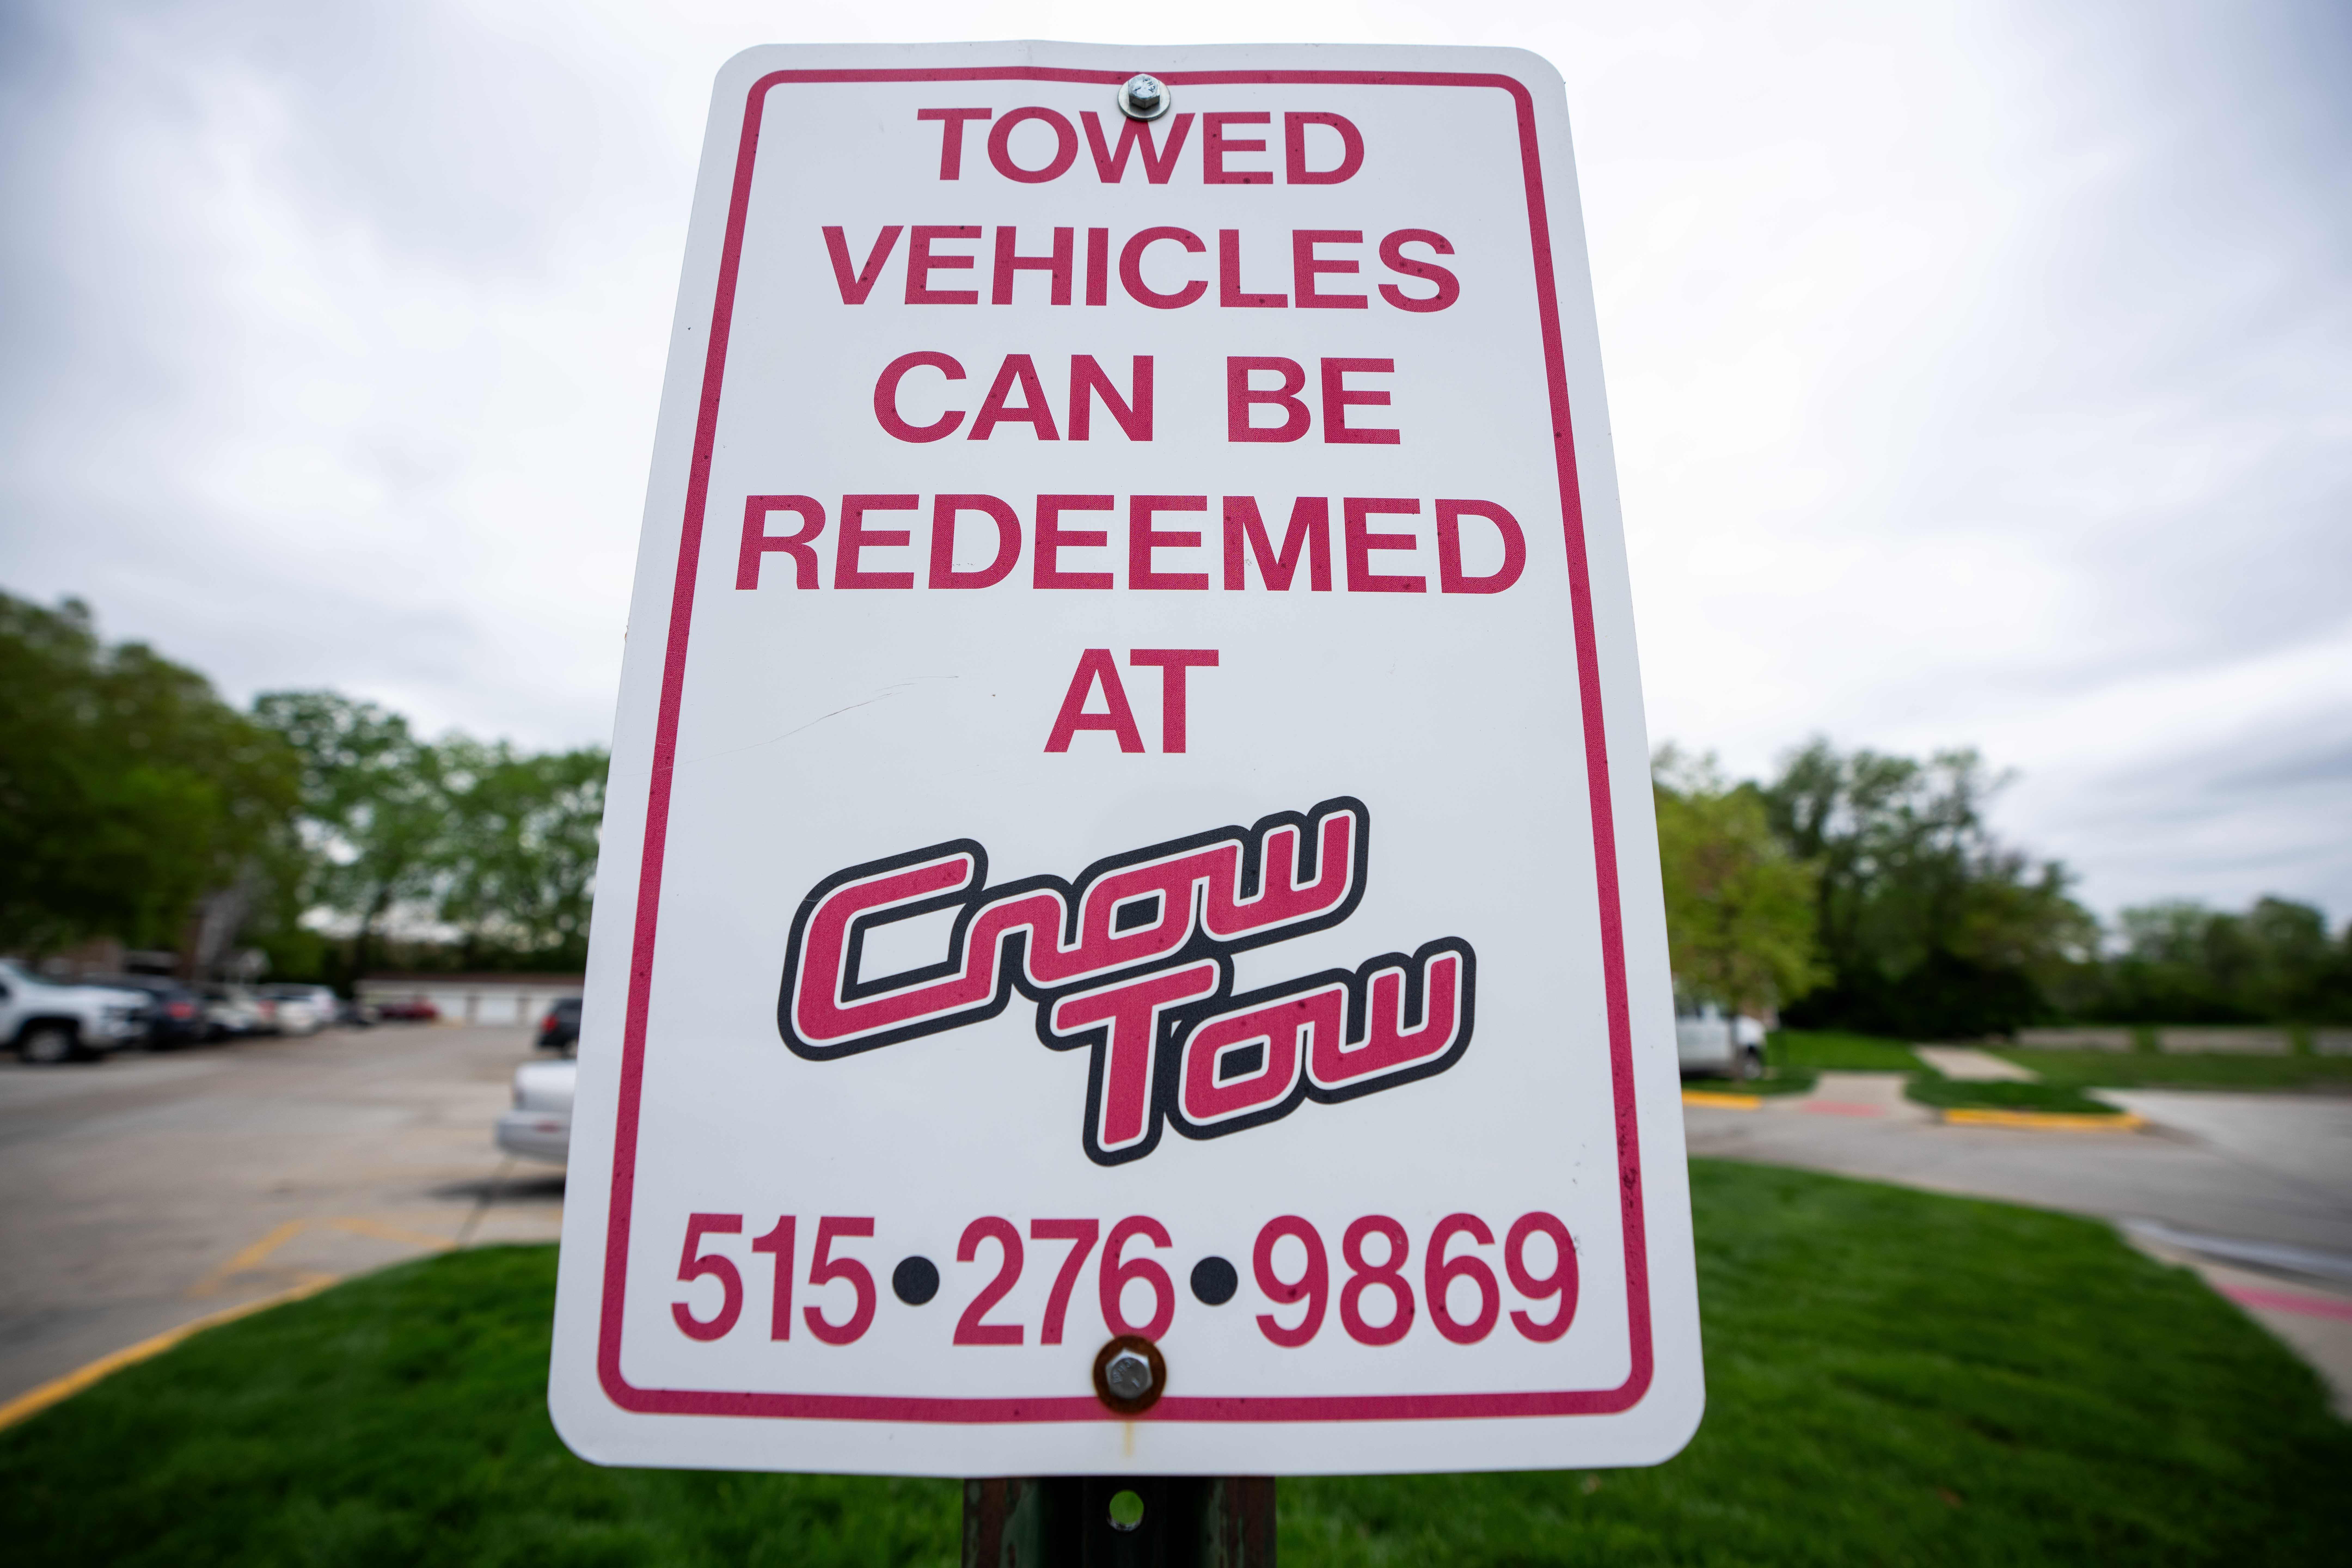 Settlement reached in lawsuit alleging Crow Tow's practices led to woman's injury